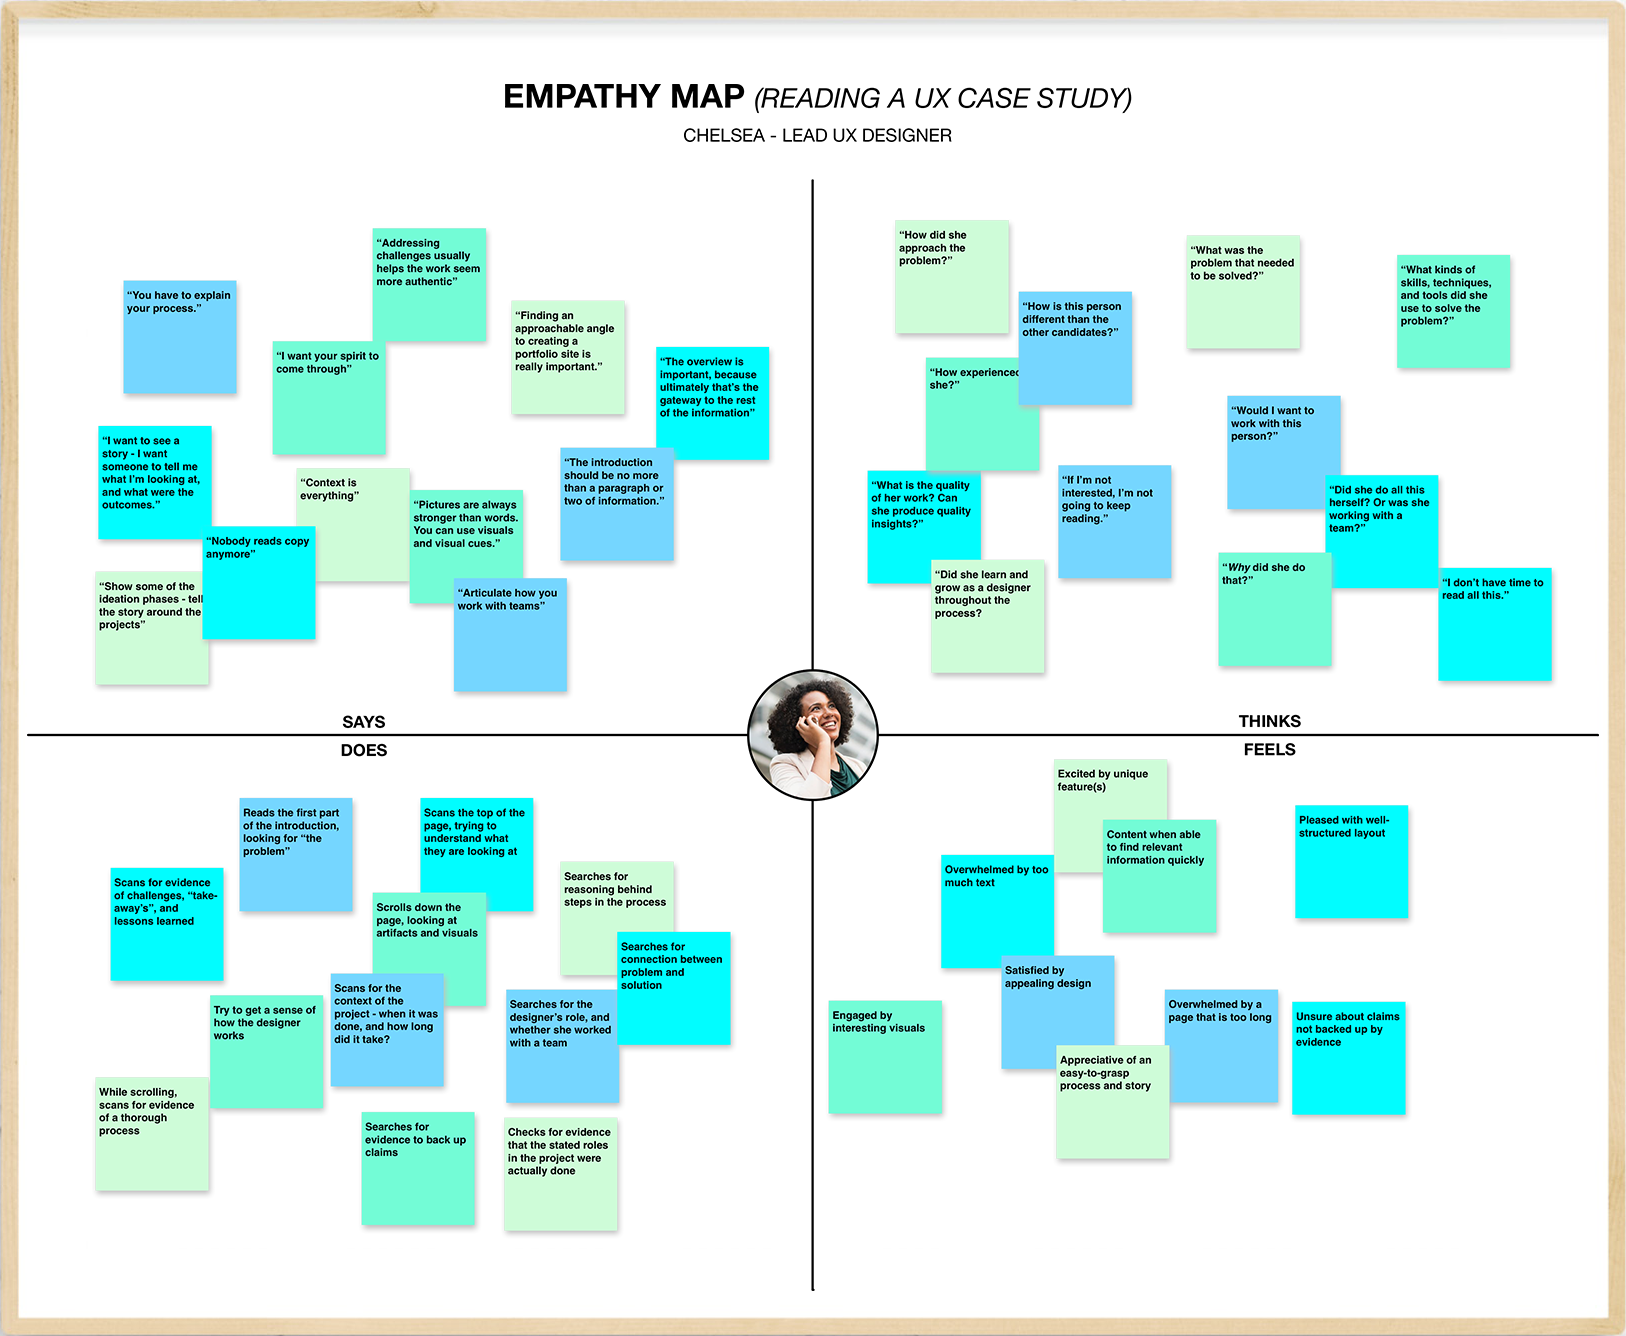 An empathy map for the UX Hiring Manager persona